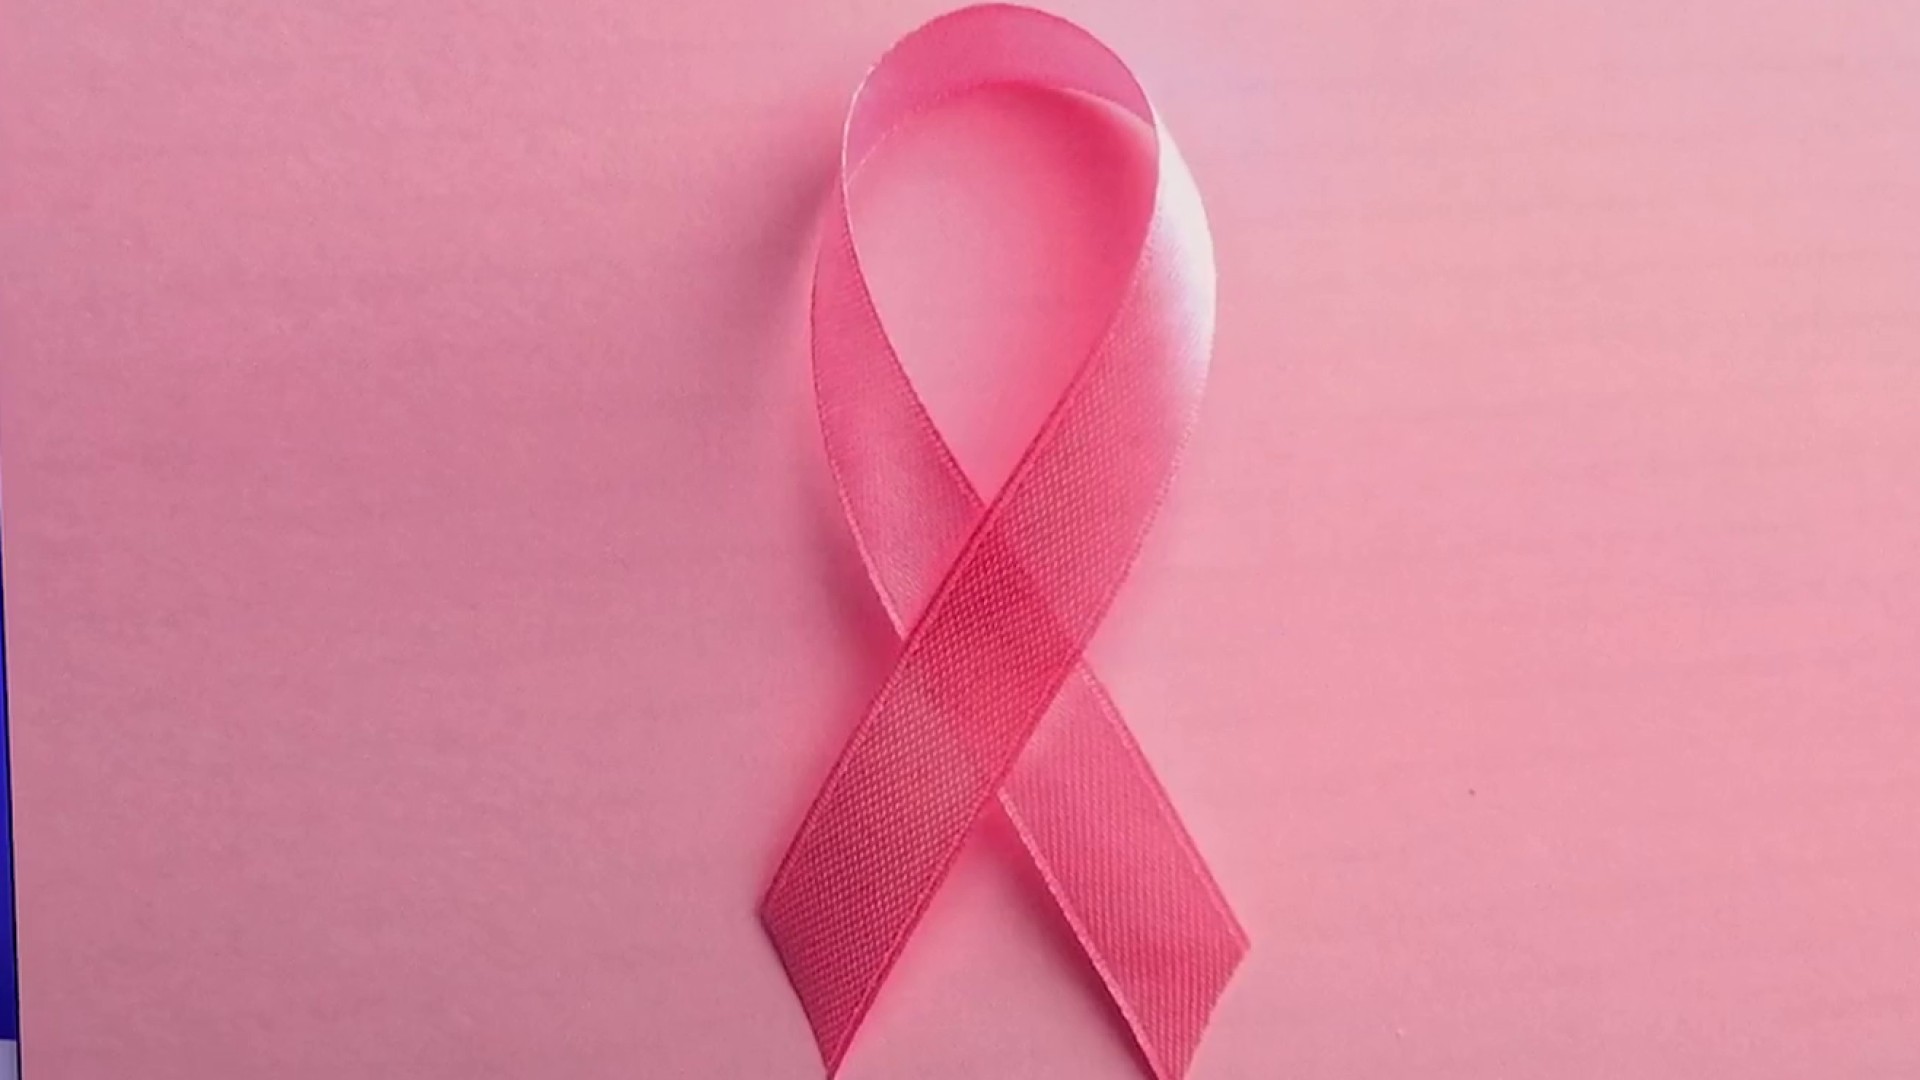 Houston Breast Reduction-October Breast Cancer Awareness Month 